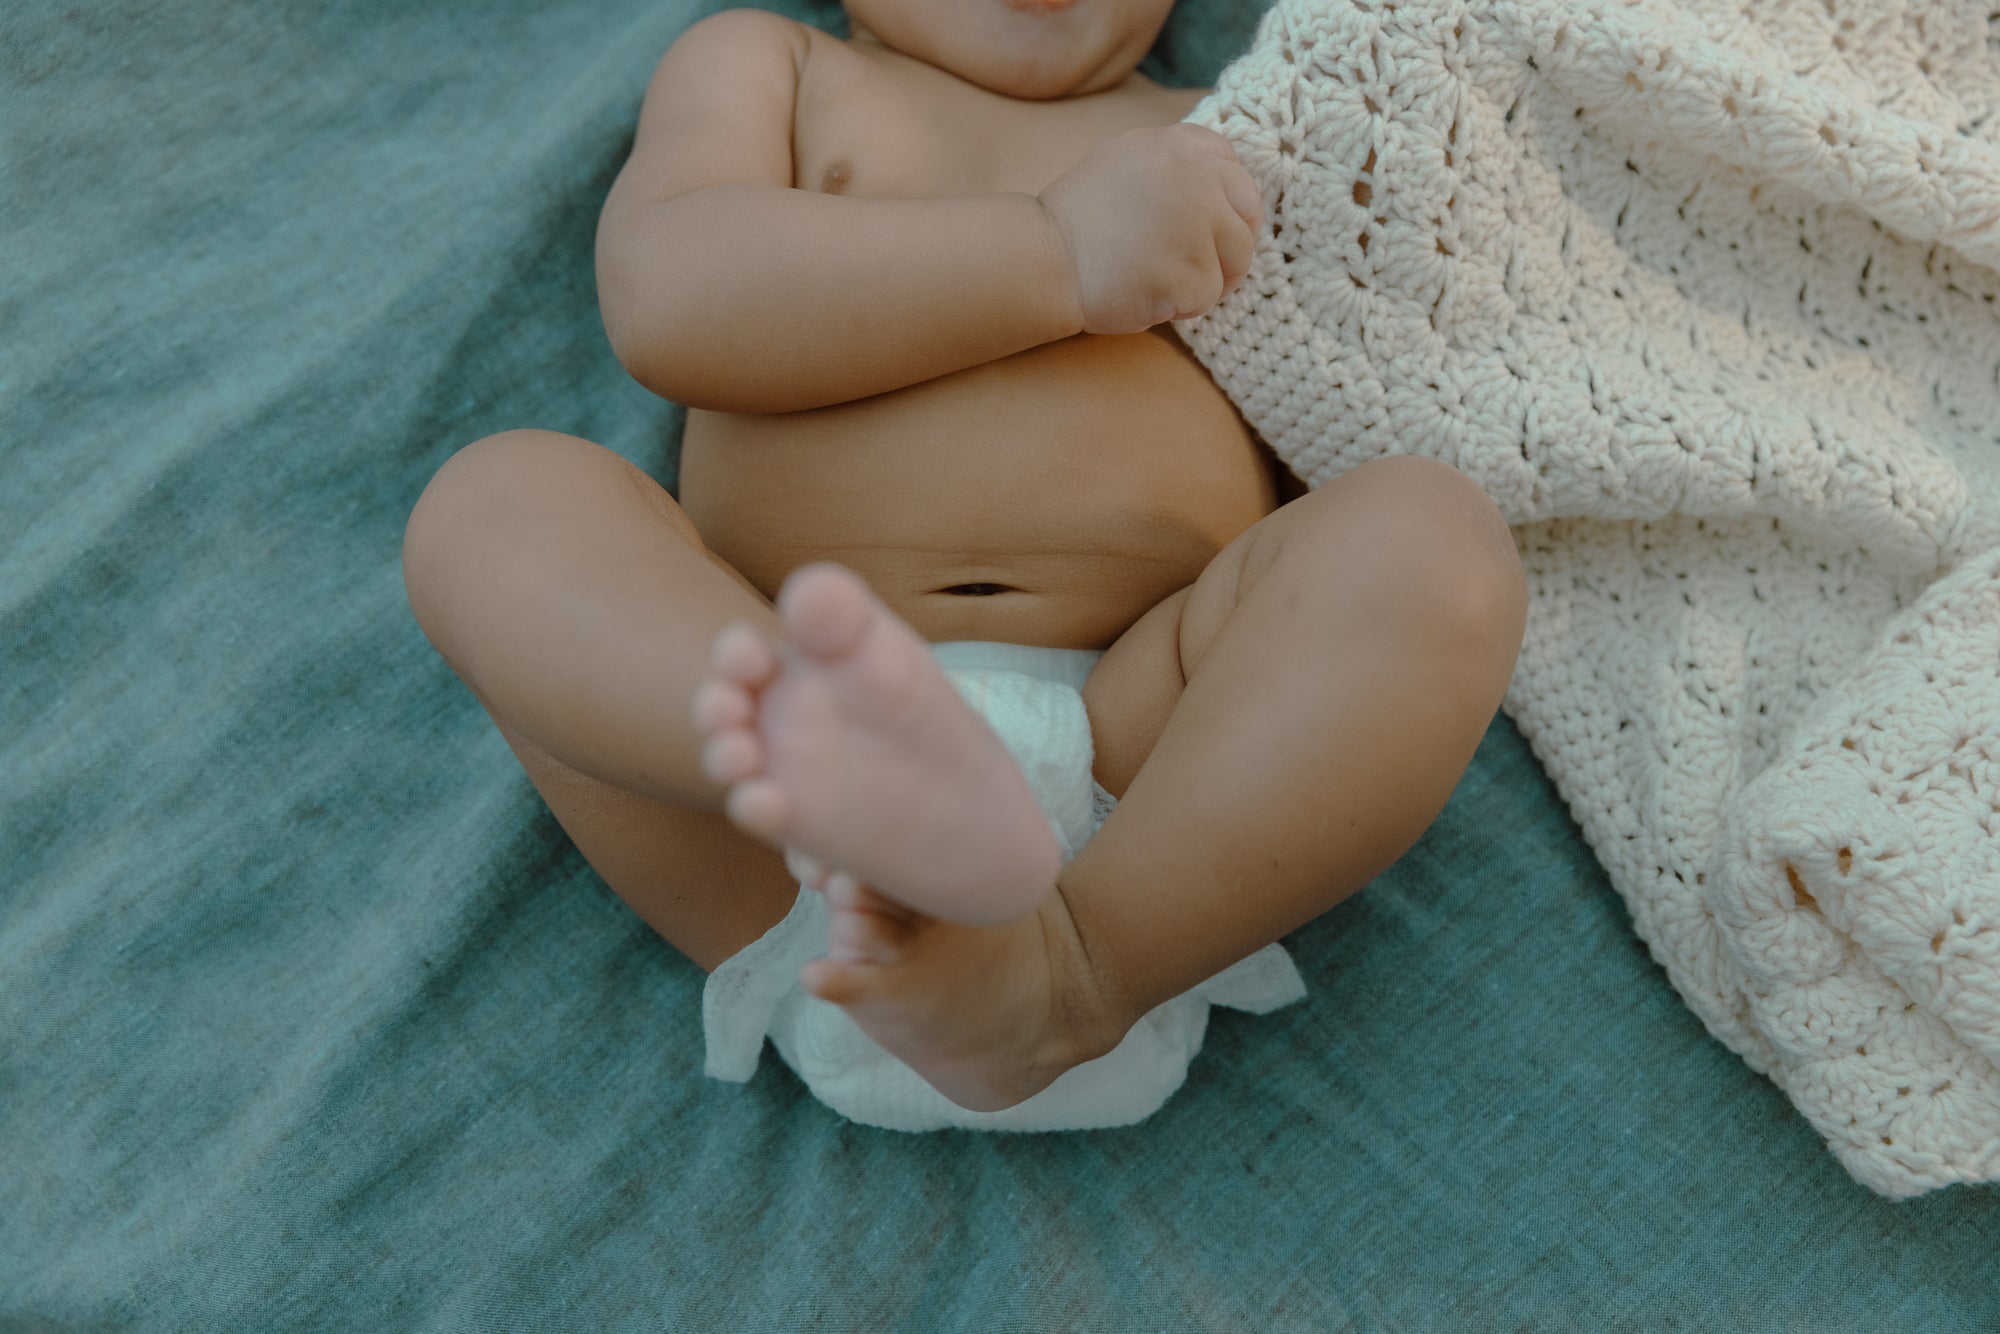 Nighttime Diaper Changes — How Often Should You Change Your Baby’s Diaper at Night?